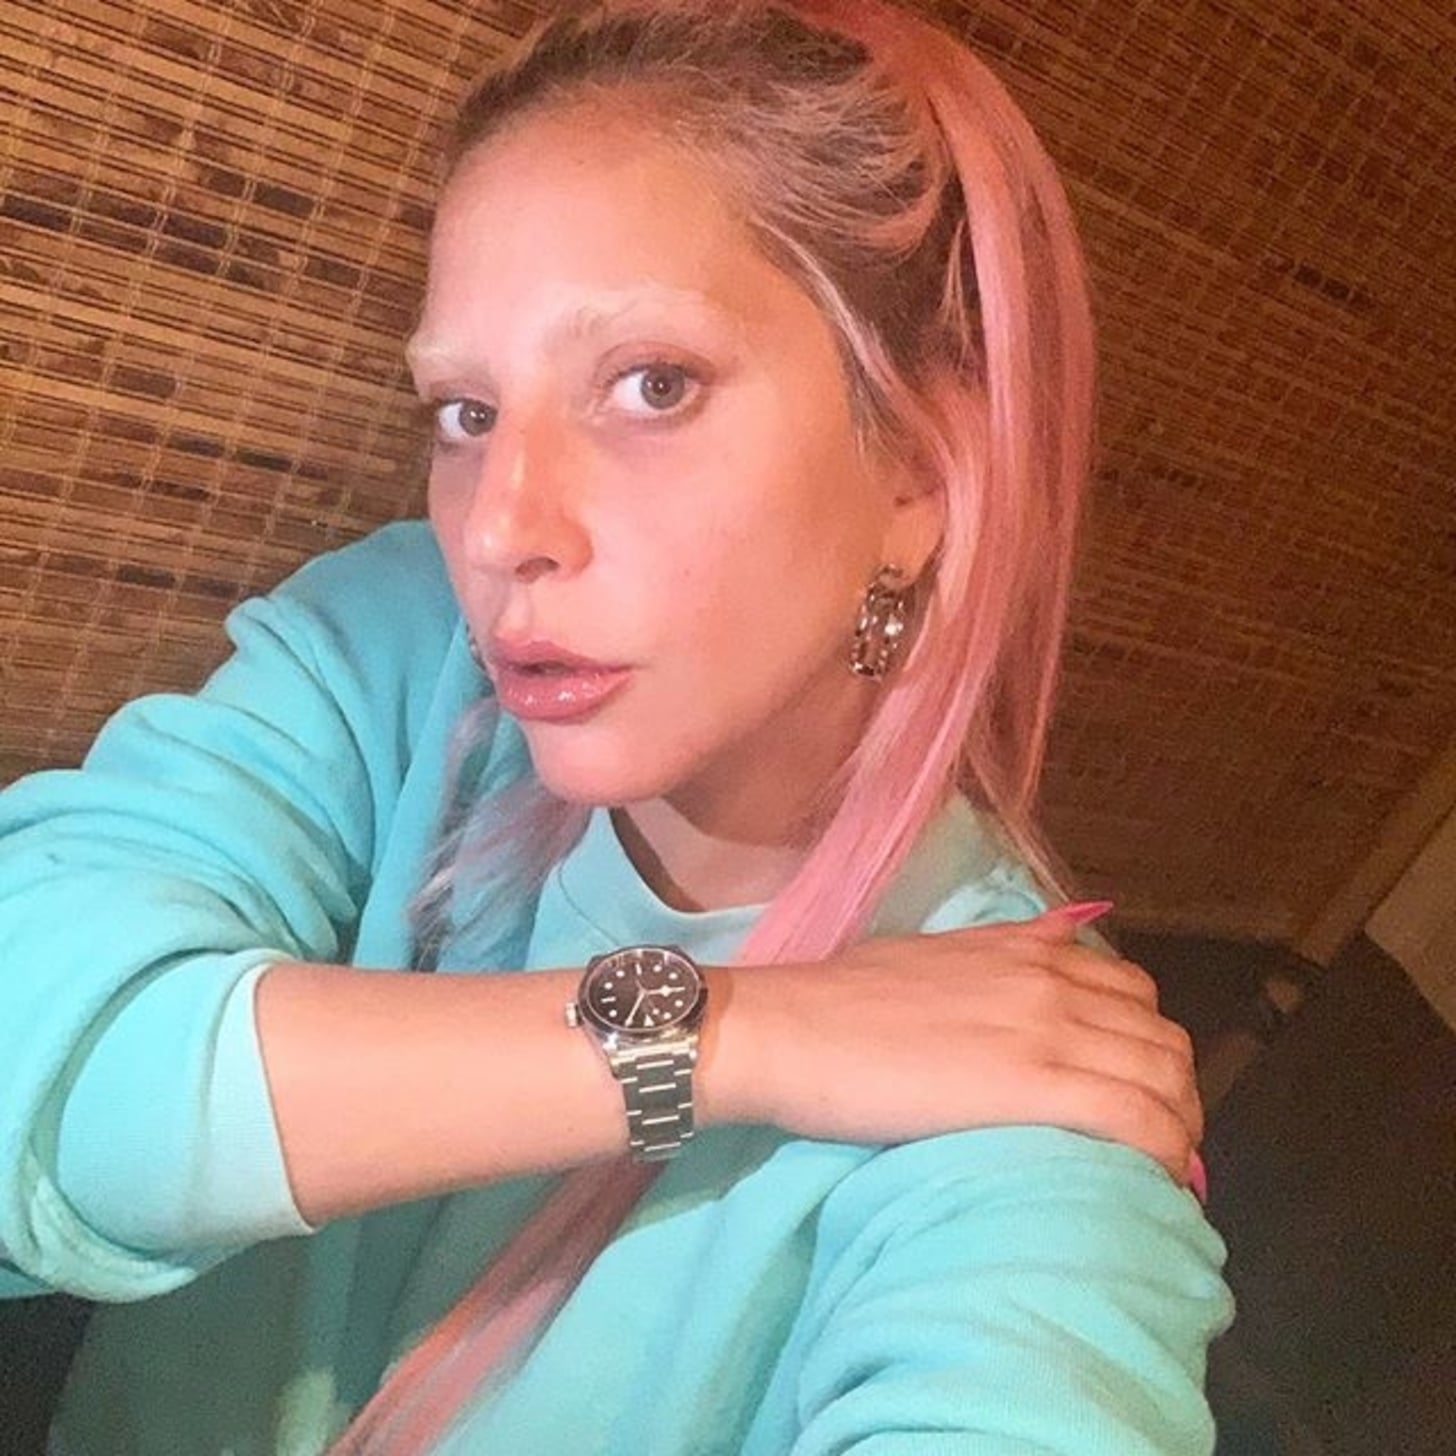 Gaga's Selfie With No Makeup and Pink Hair 2020 Beauty